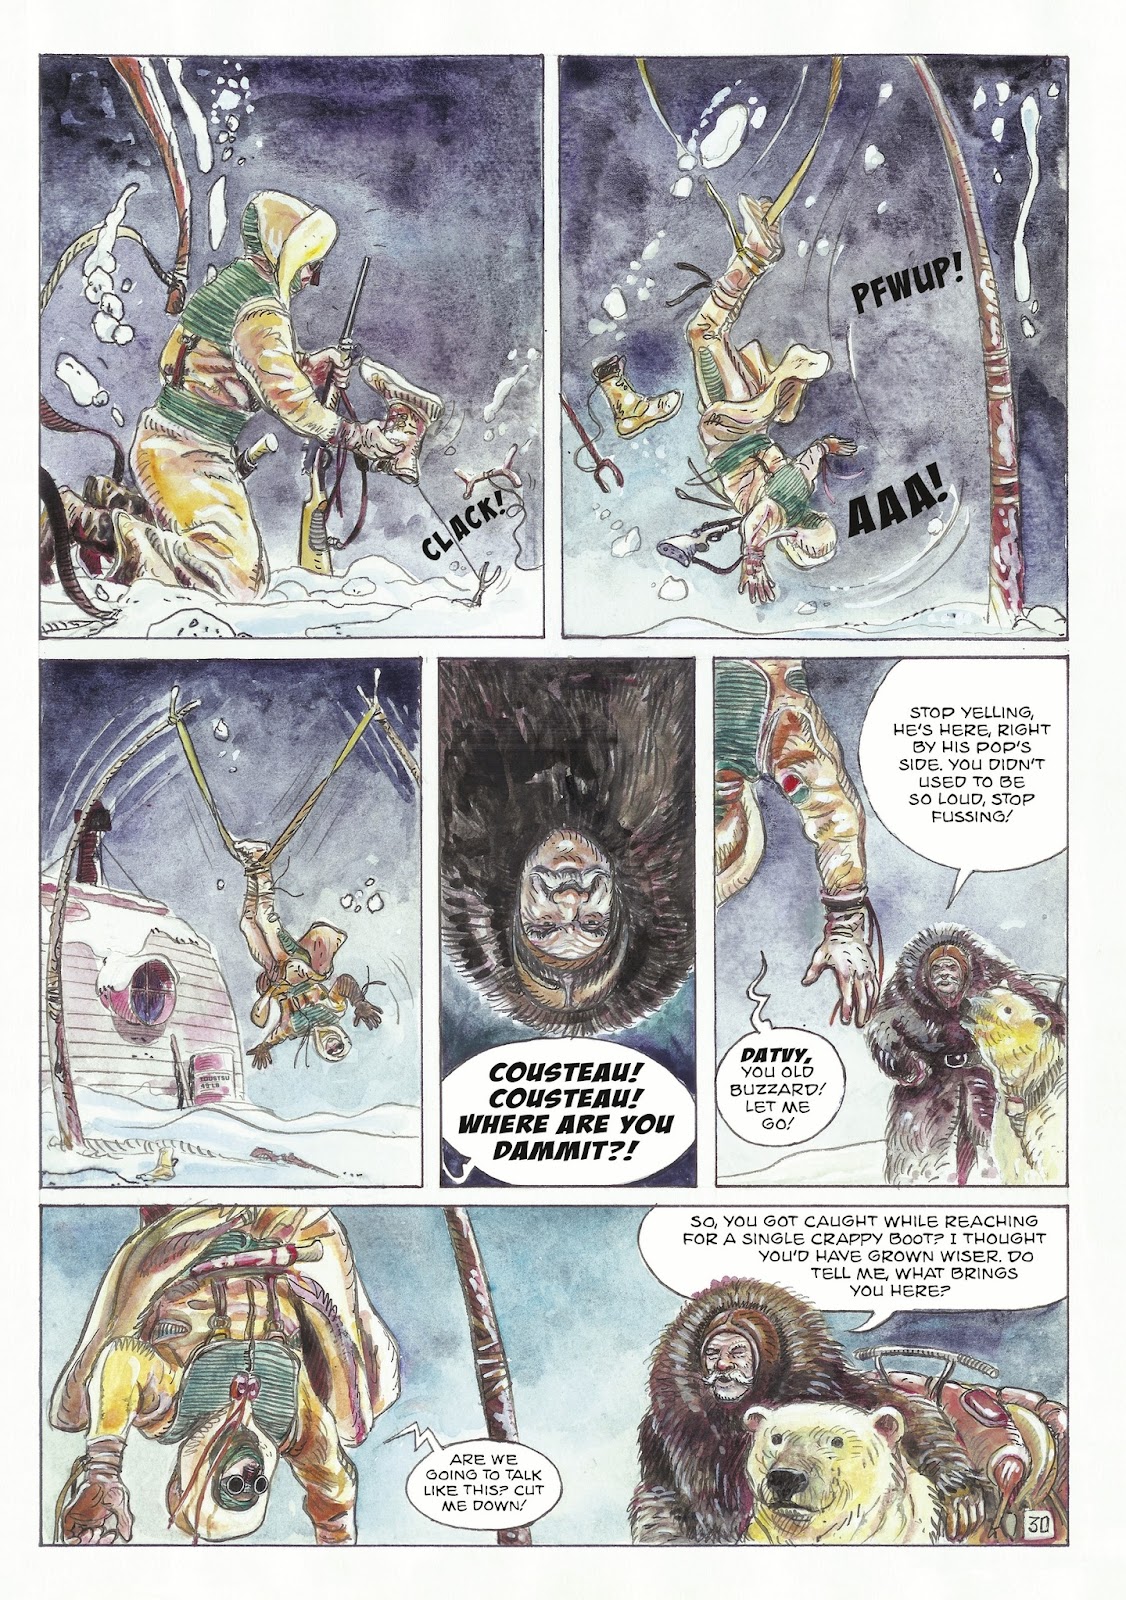 The Man With the Bear issue 1 - Page 32